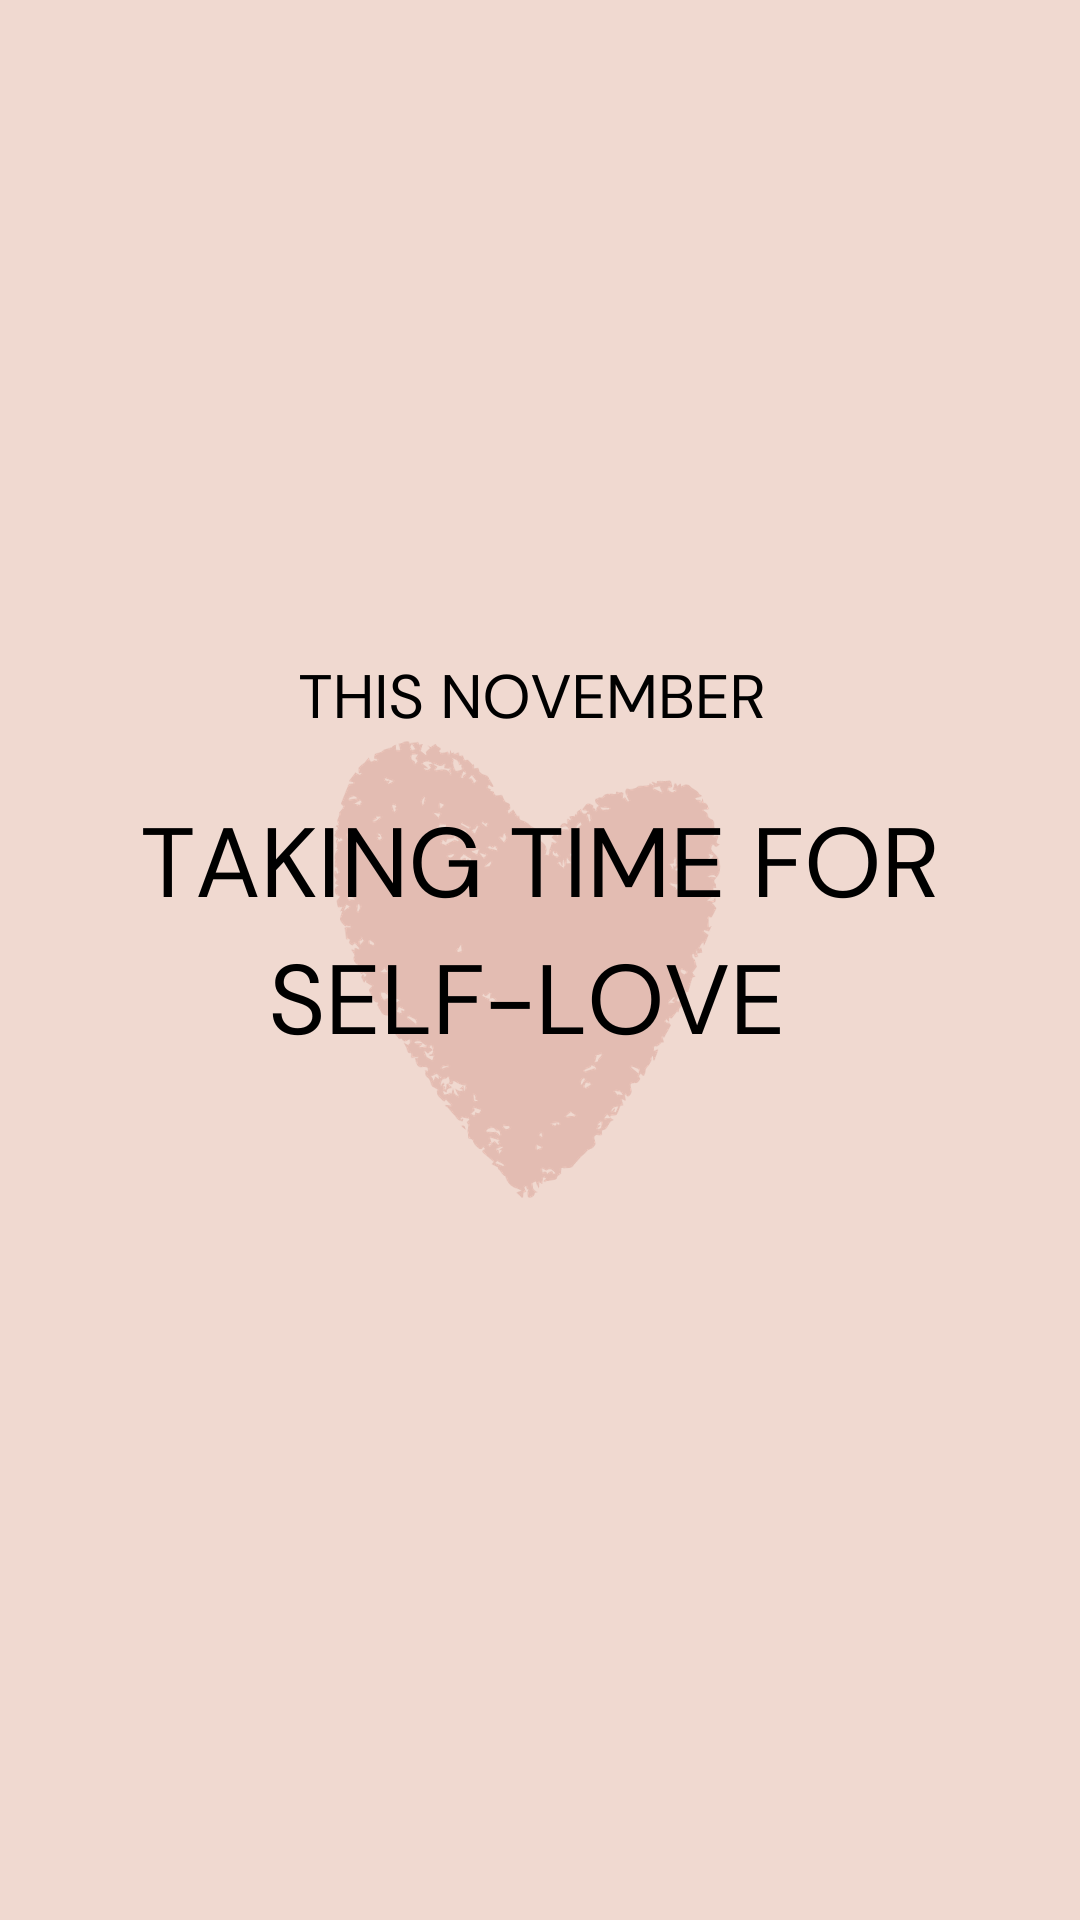 TAKING TIME FOR SELF-LOVE THIS NOVEMBER